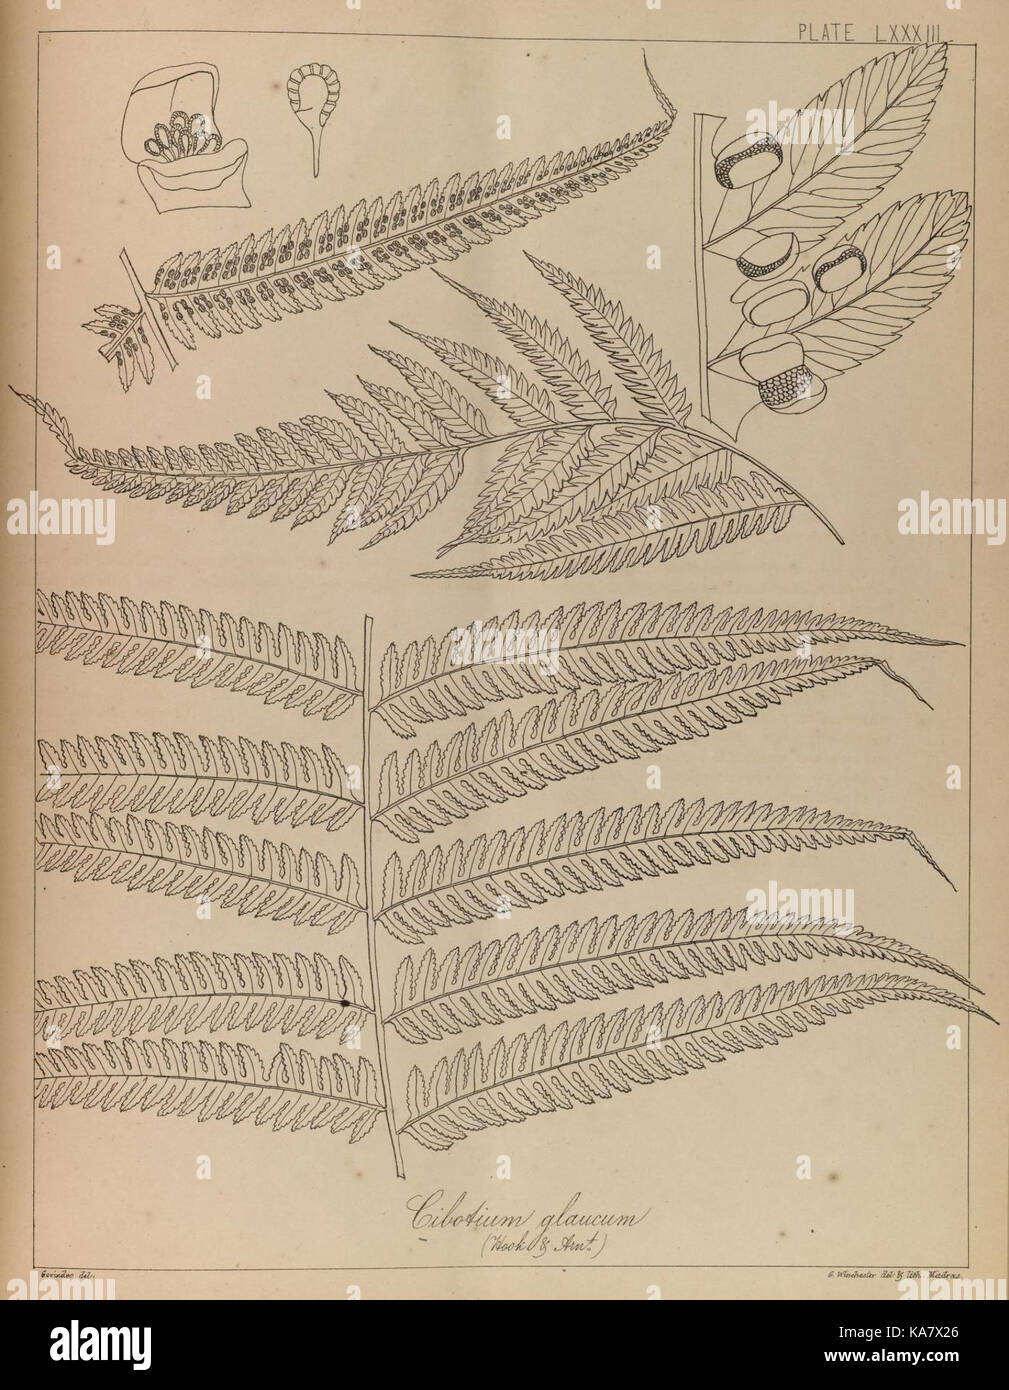 The ferns of British India (PLATE LXXXIII) (8530302371) Stock Photo